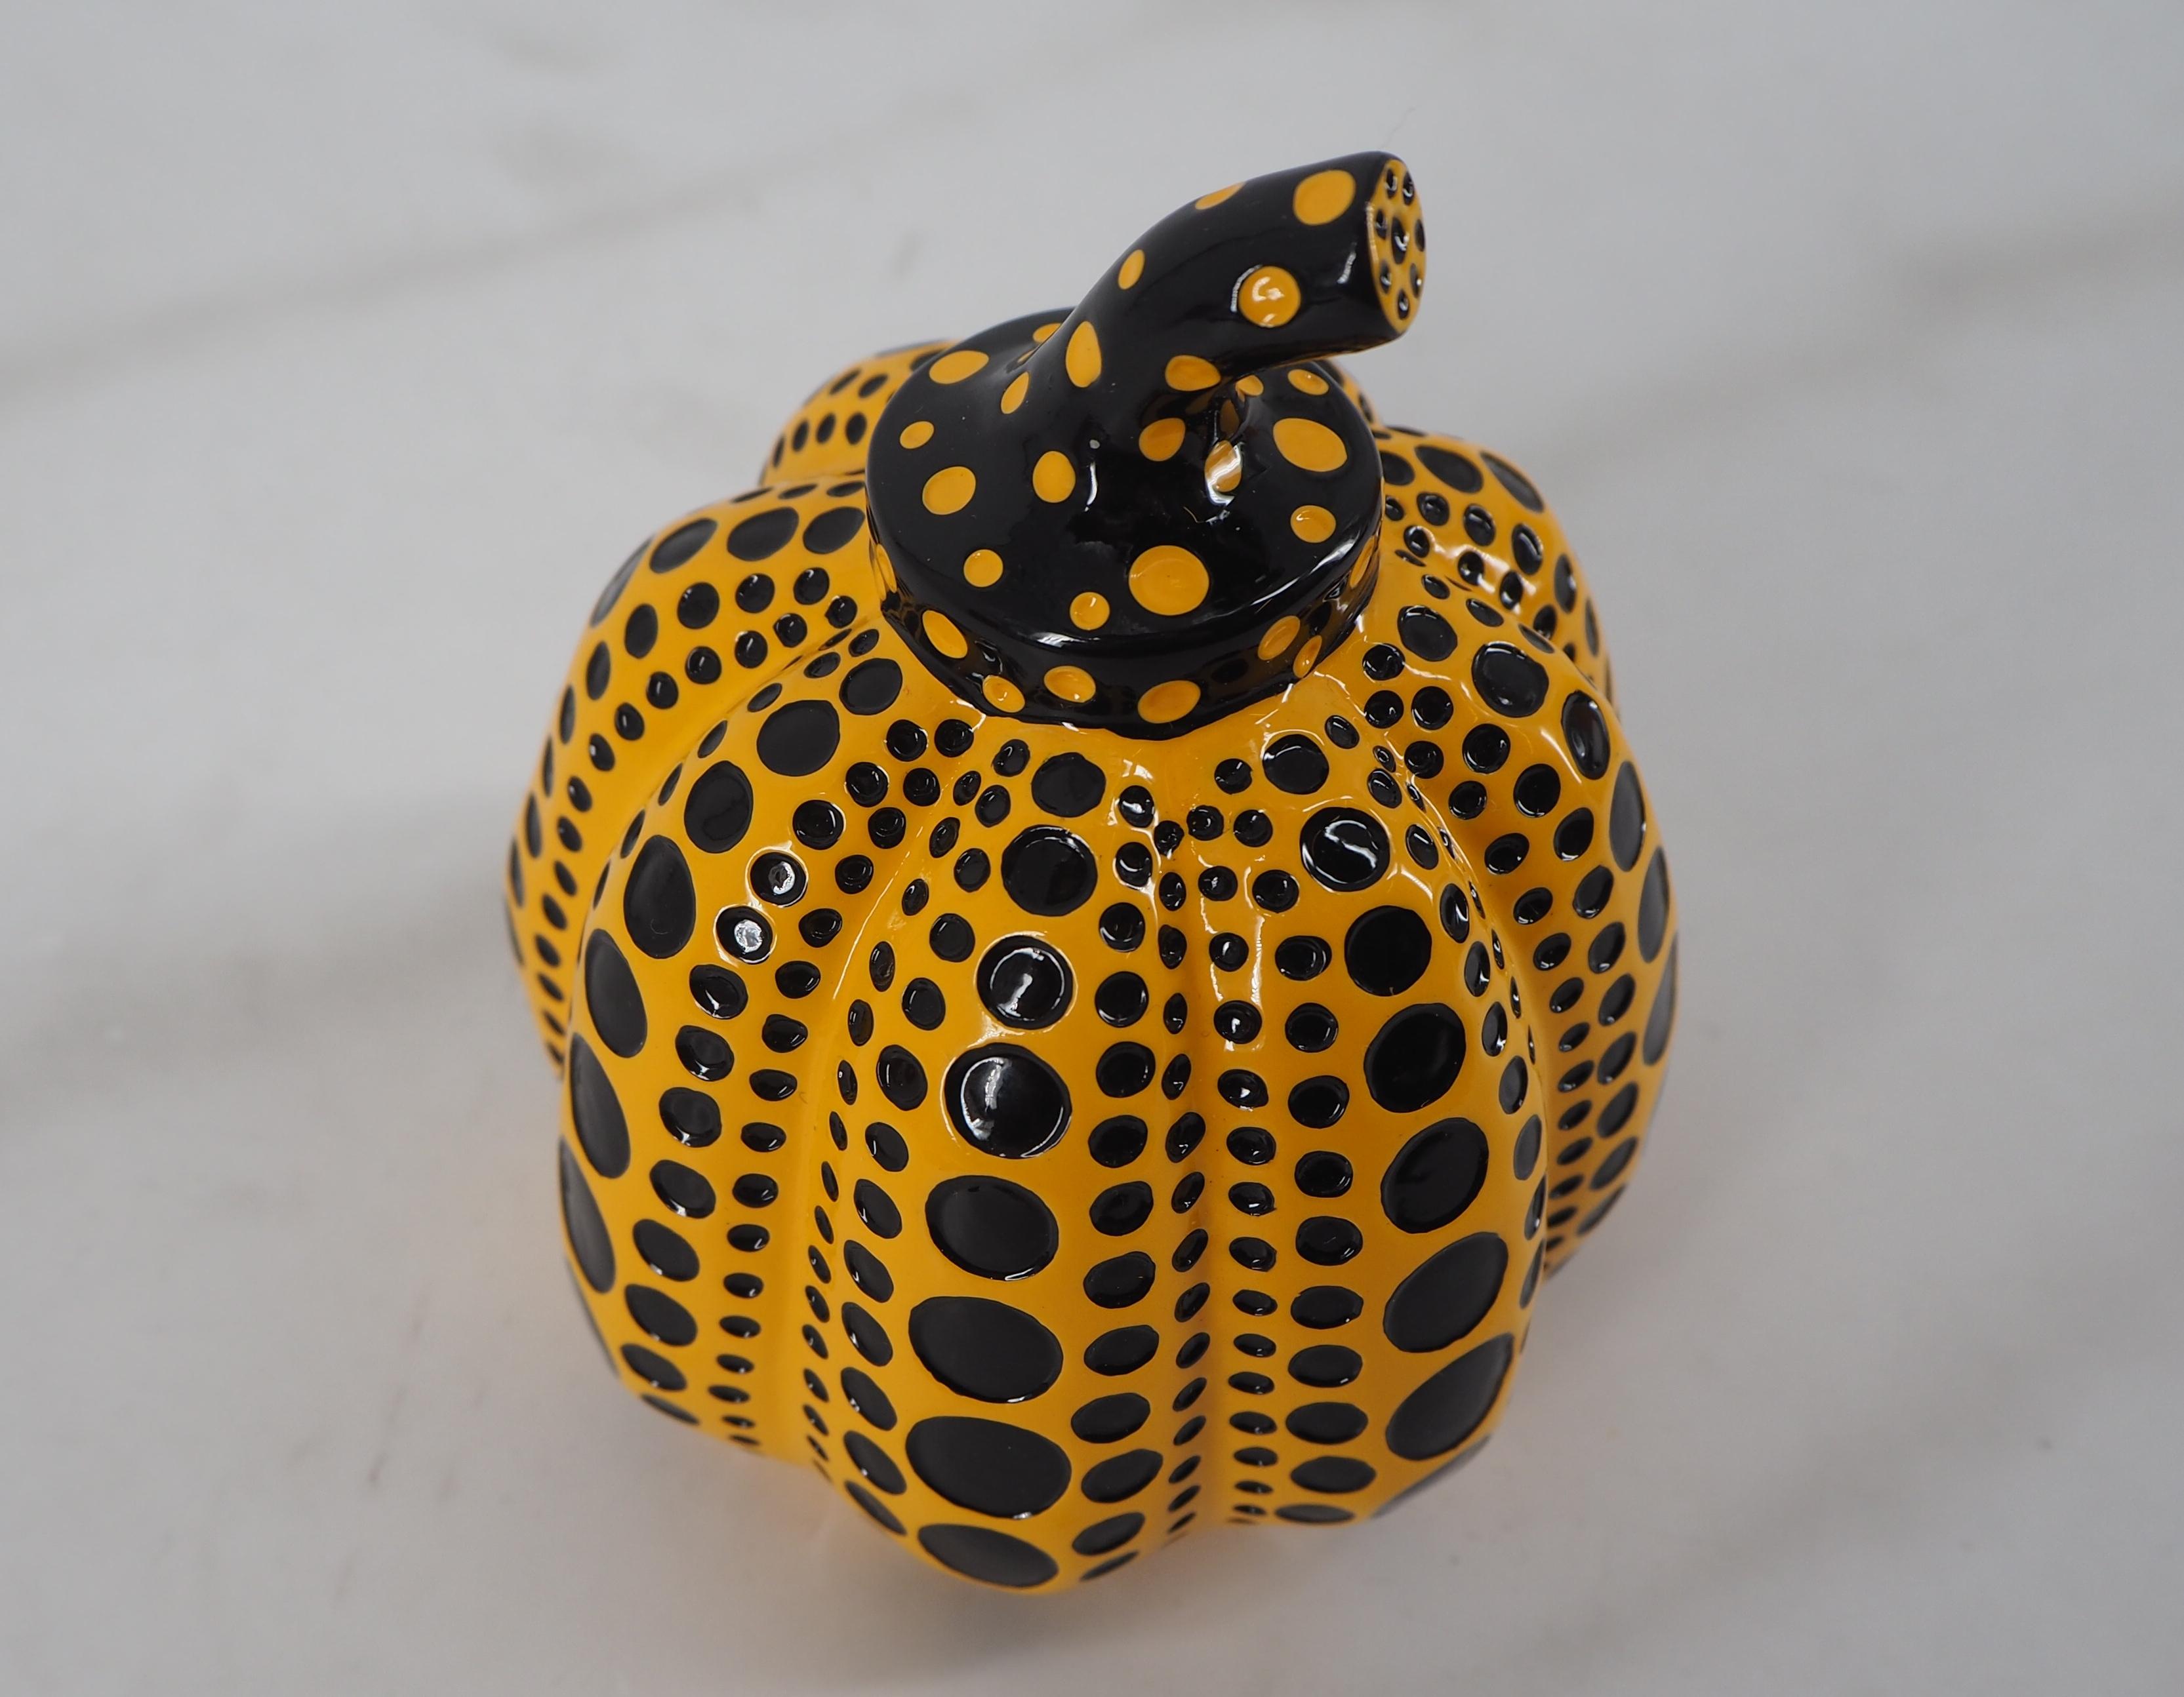 Yayoi Kusama
Pumpkin yellow (Dots Obsession)

Sculpture in lacquer-painted resin, with original box
Stamped with the artist's name '©YAYOI KUSAMA' (on the underside)
Diameter: 8 cm
Height: 10.5 cm
Presented in the original editor case
These works